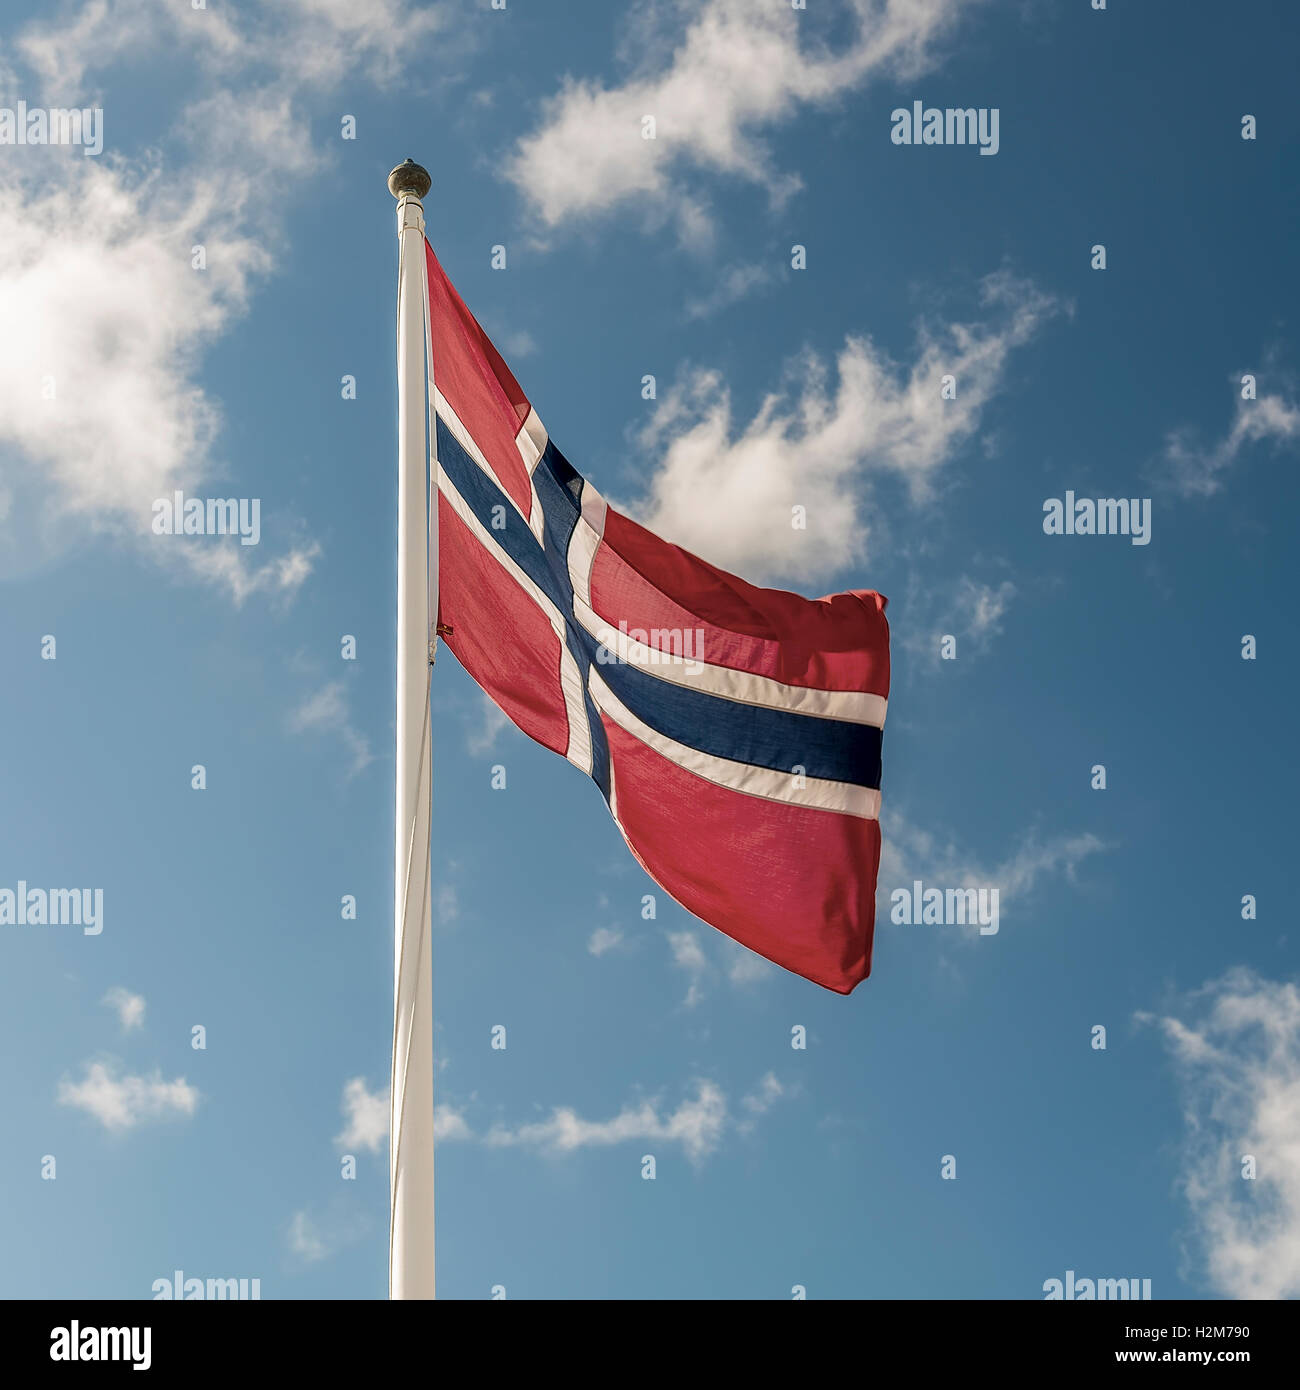 A Norwegian flag flutters in the wind against a blue sky background Stock Photo